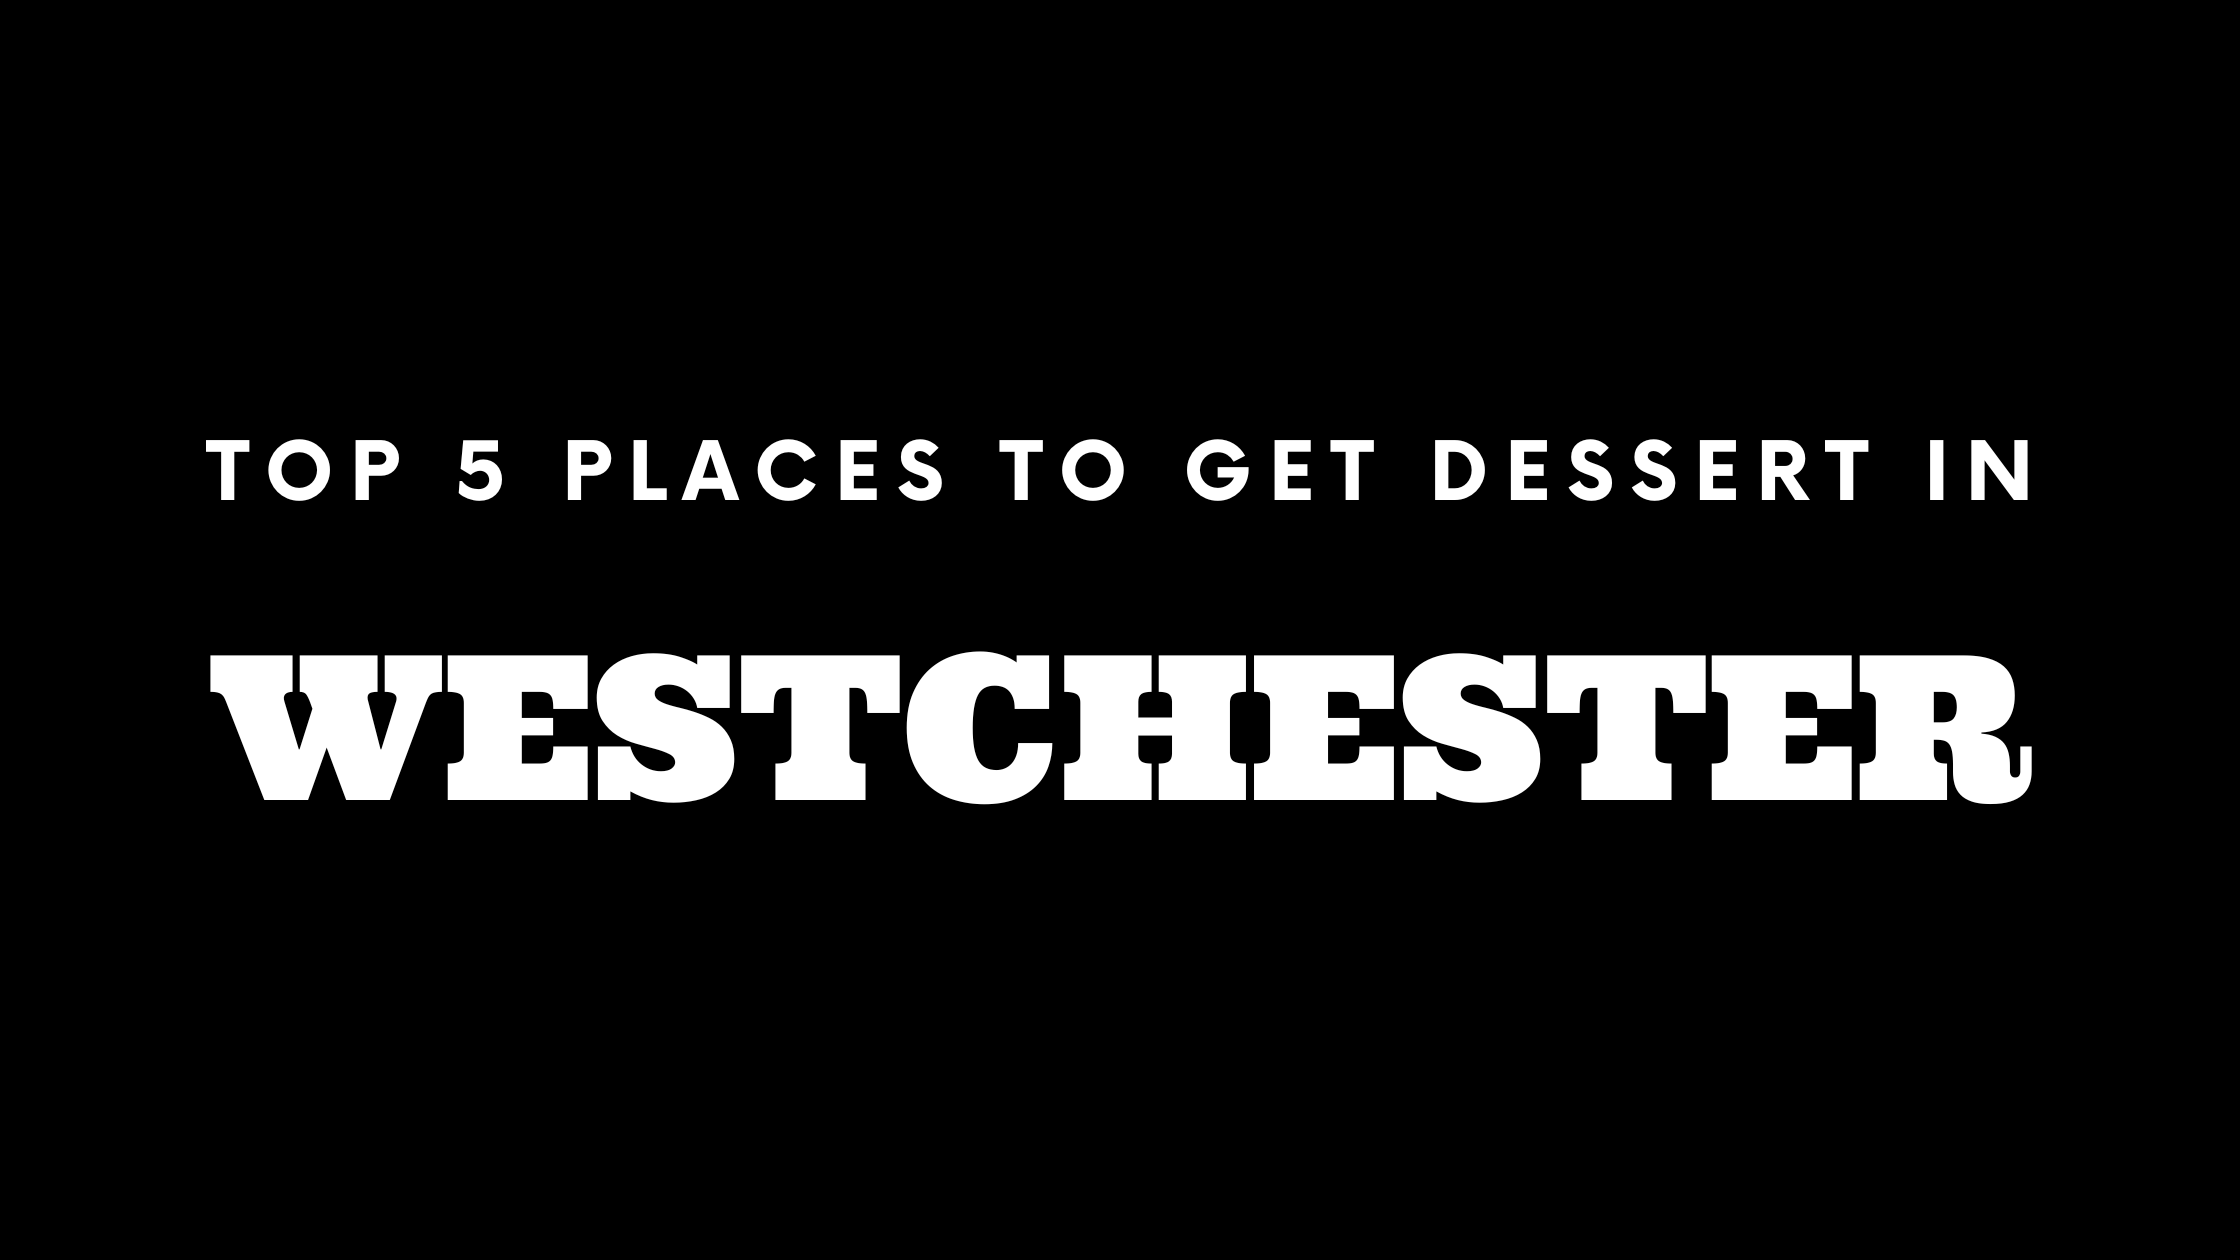 Top 5 Places to Get Dessert in Westchester 